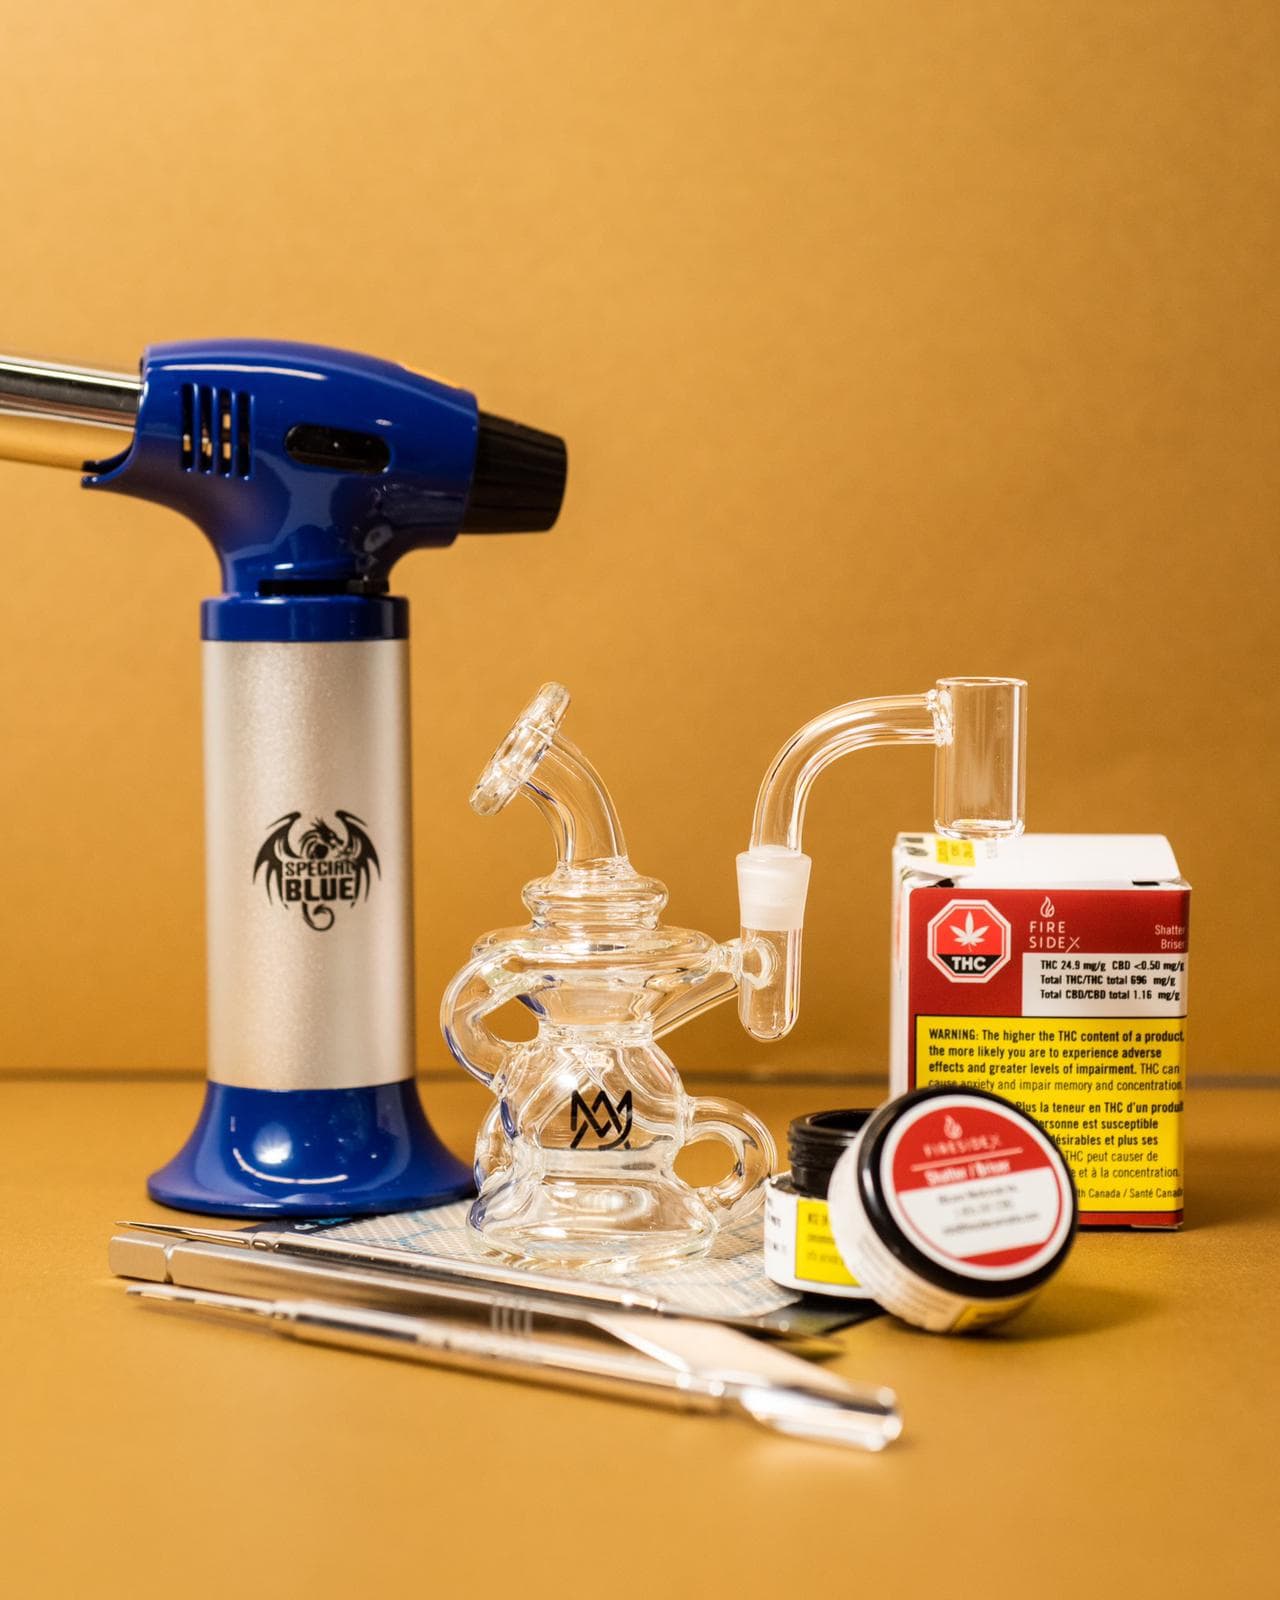 Weed 101: What Exactly Is Dabbing, and How Do You Do It?